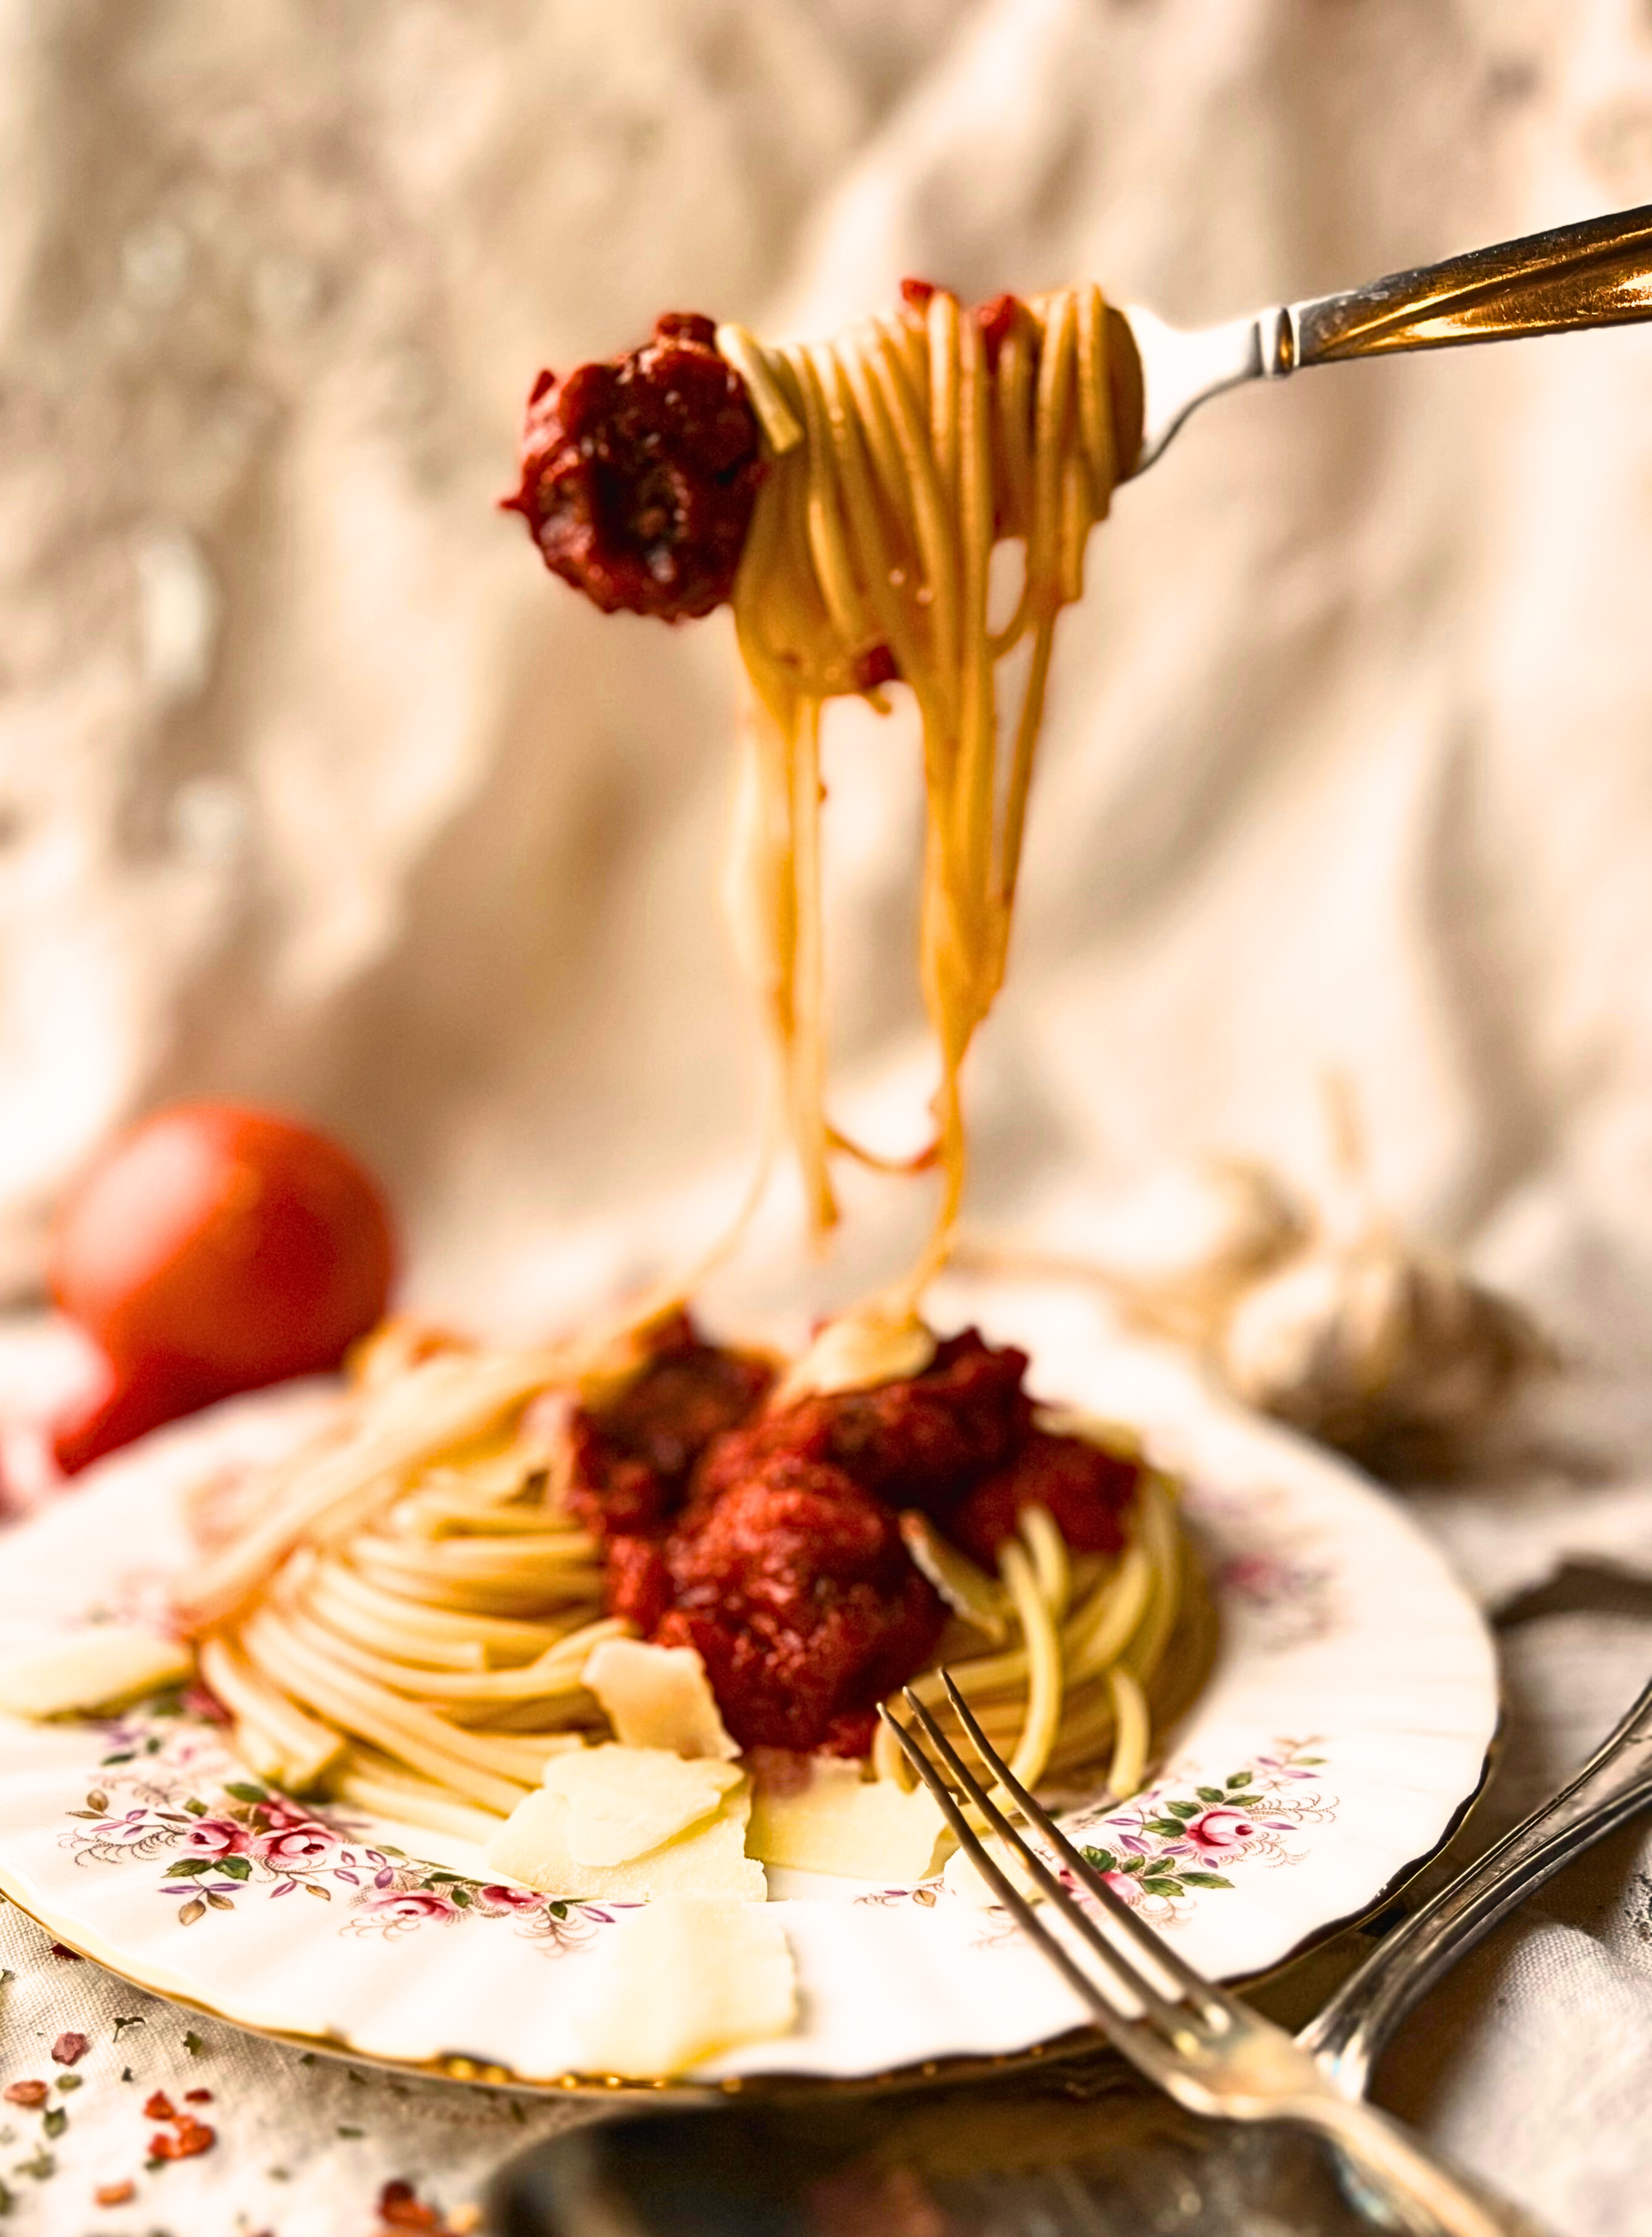 Georgia's spiggetta (spaghetti and meatballs) on a pink floral plate with a fork holding up some of the spaghetti and a meatball on the end.